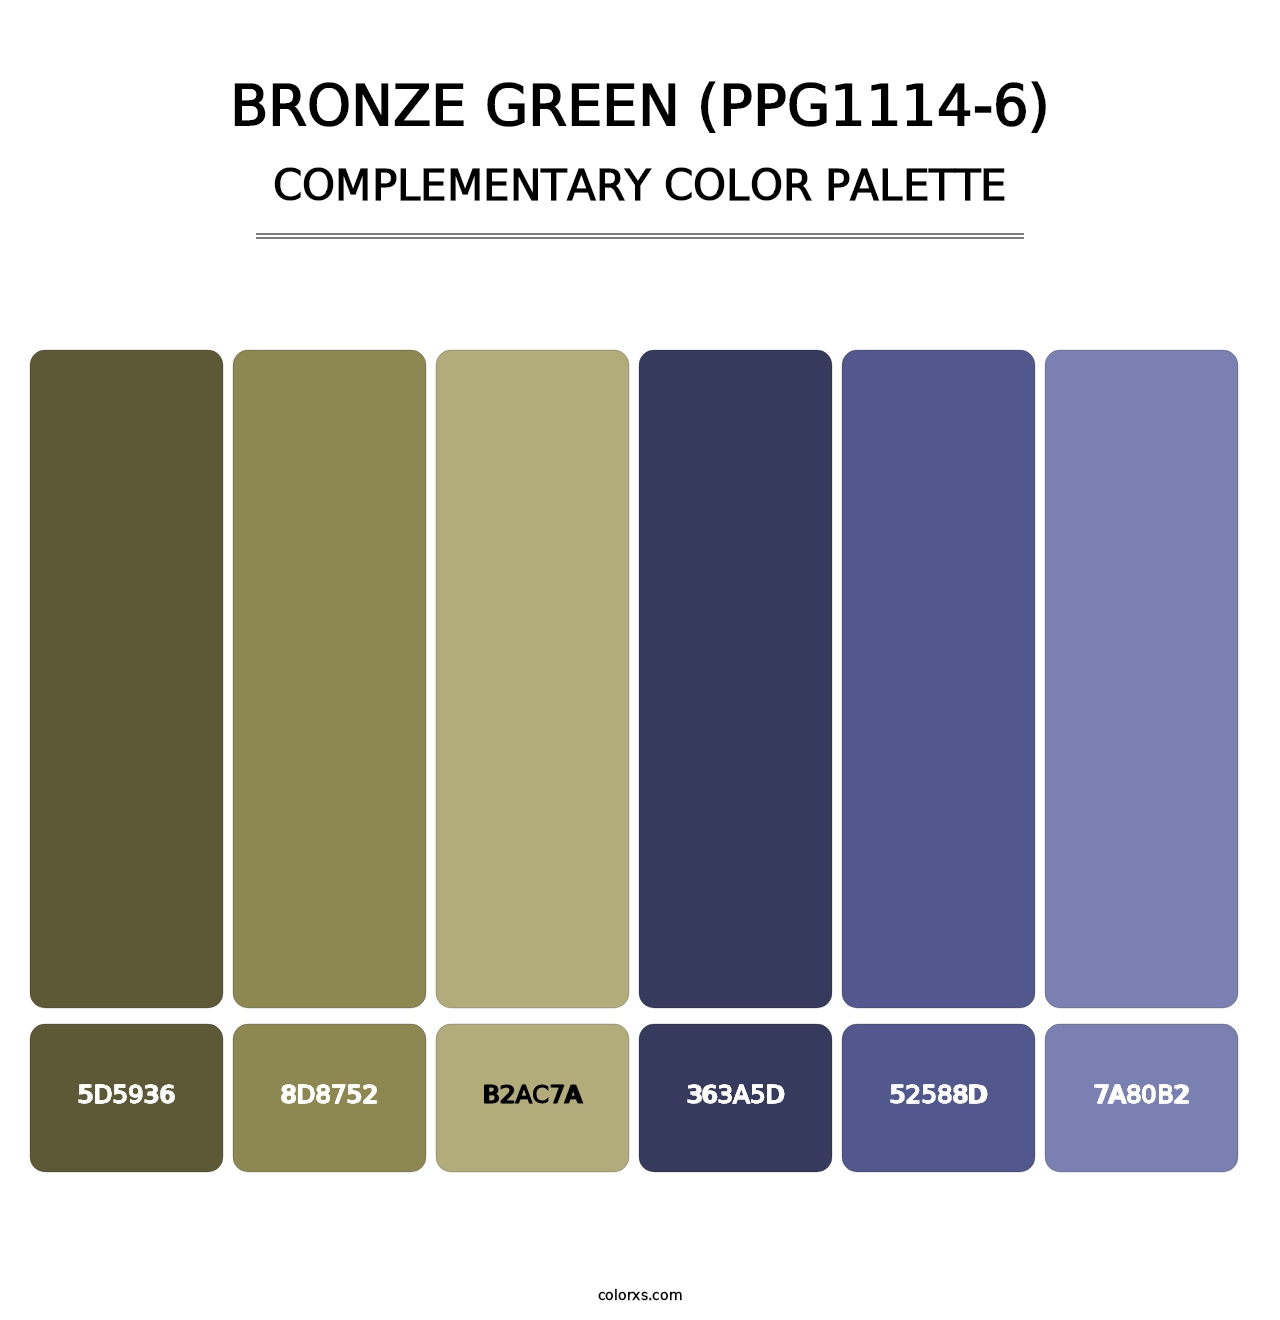 Bronze Green (PPG1114-6) - Complementary Color Palette